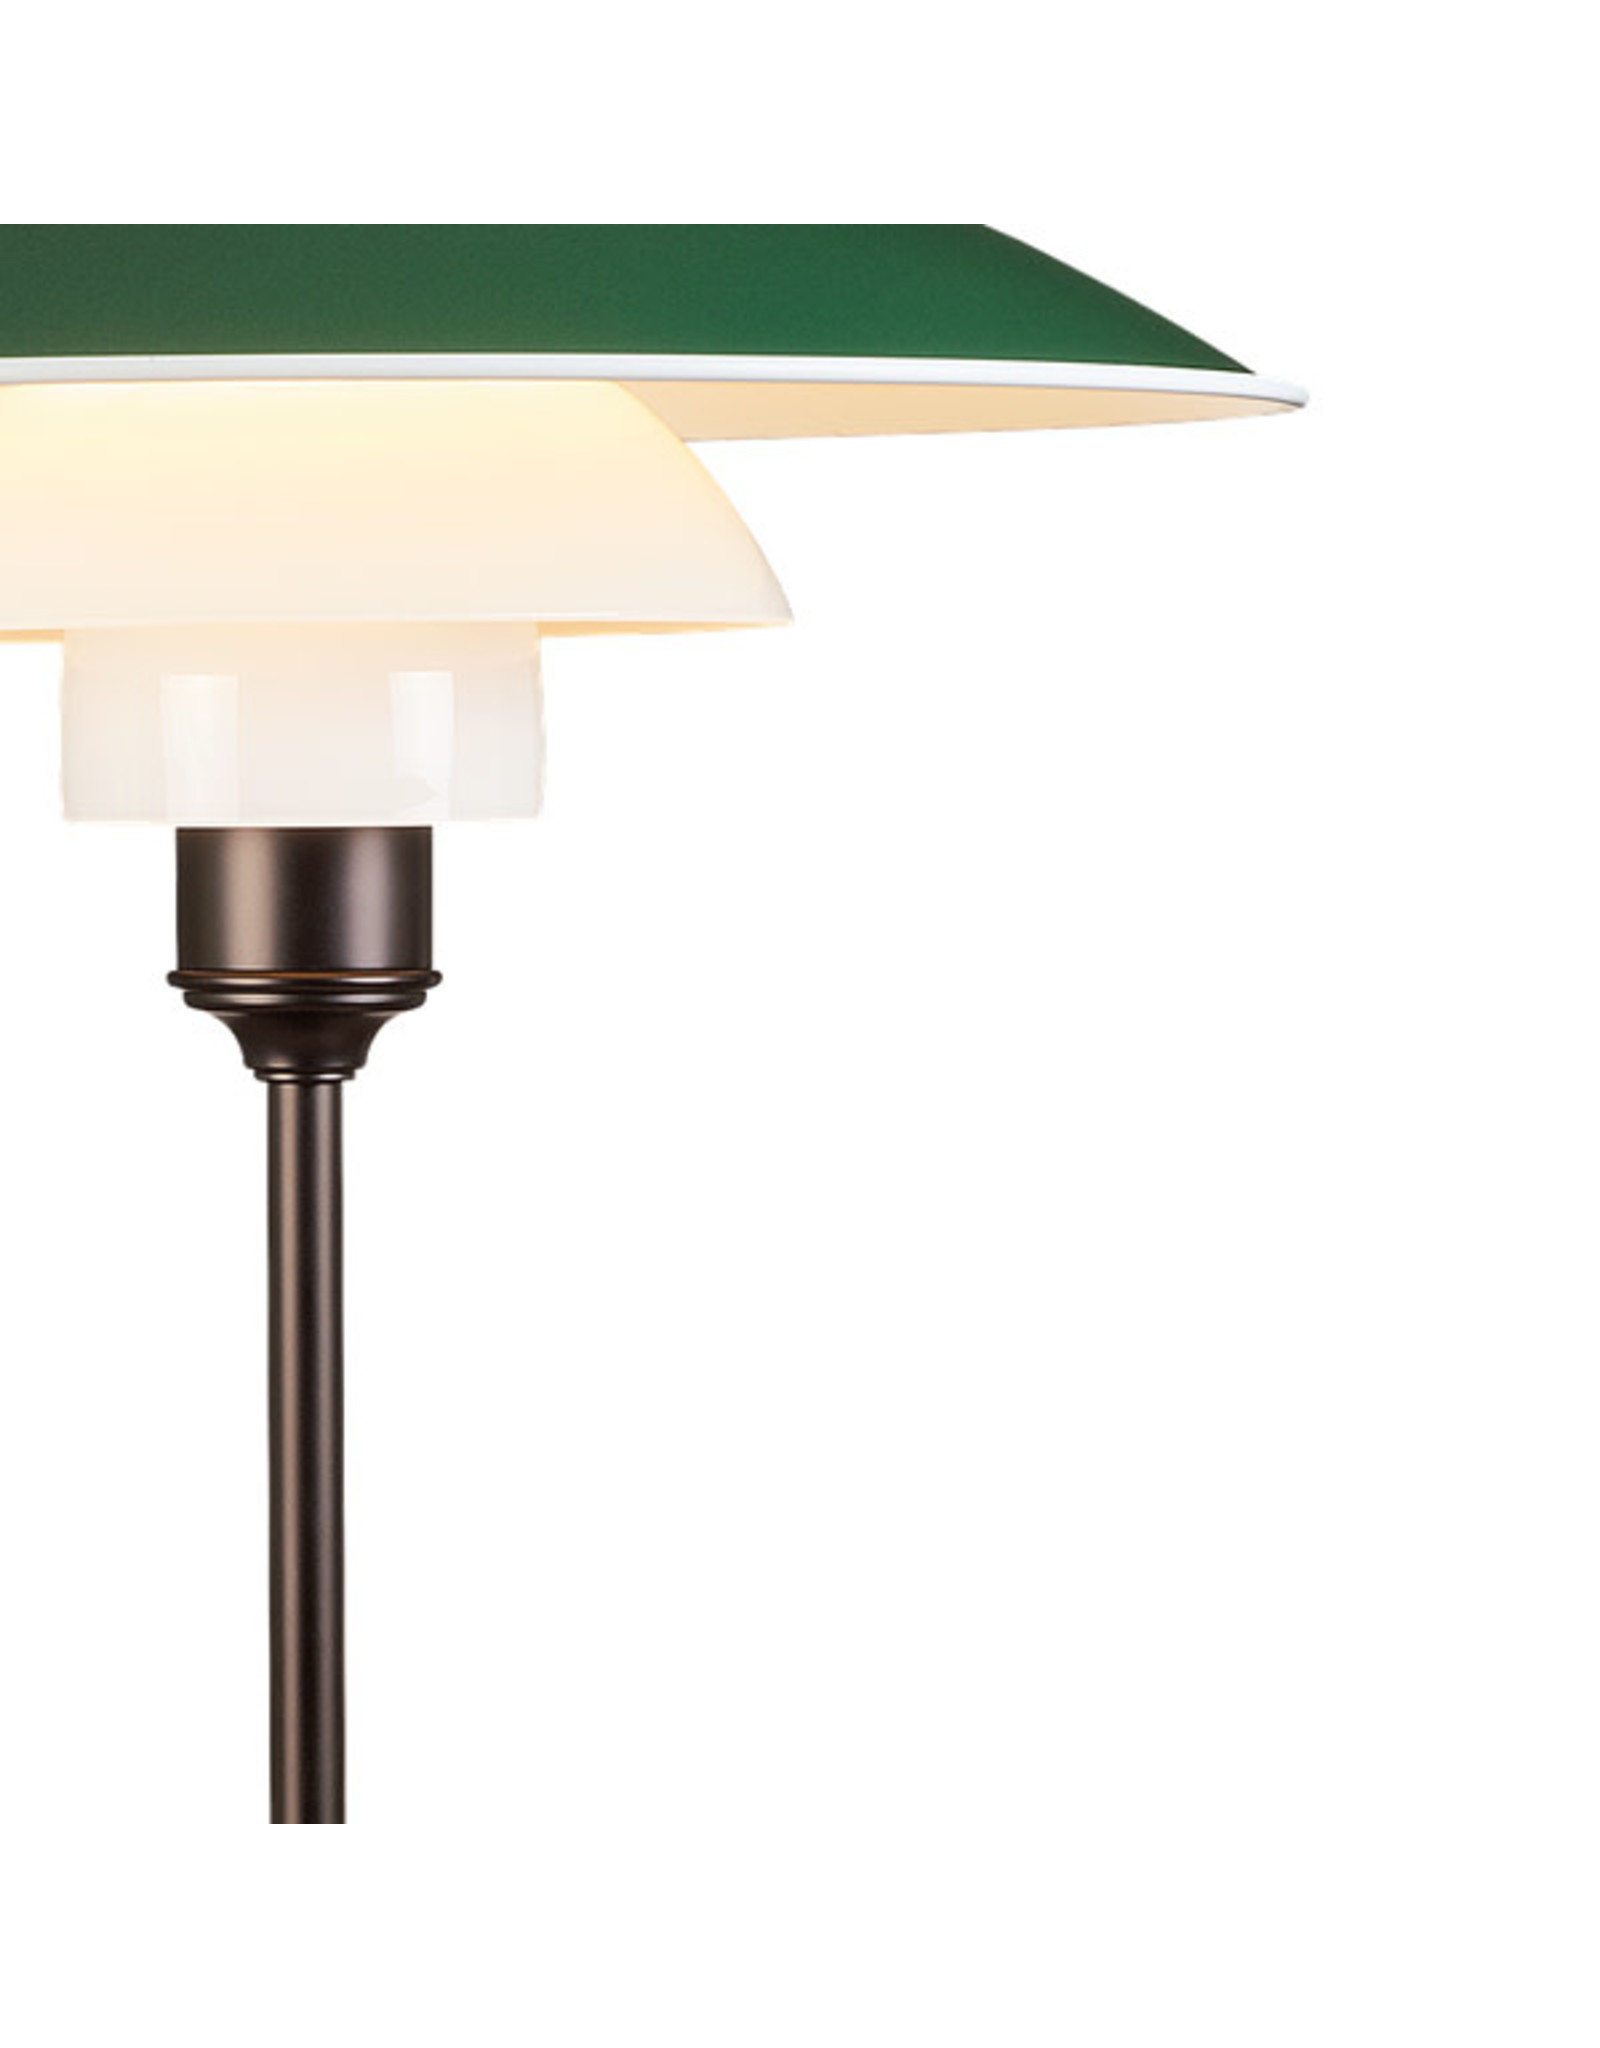 PH 3 1/2-2 1/2 TABLE LAMP IN COLOR FINISH